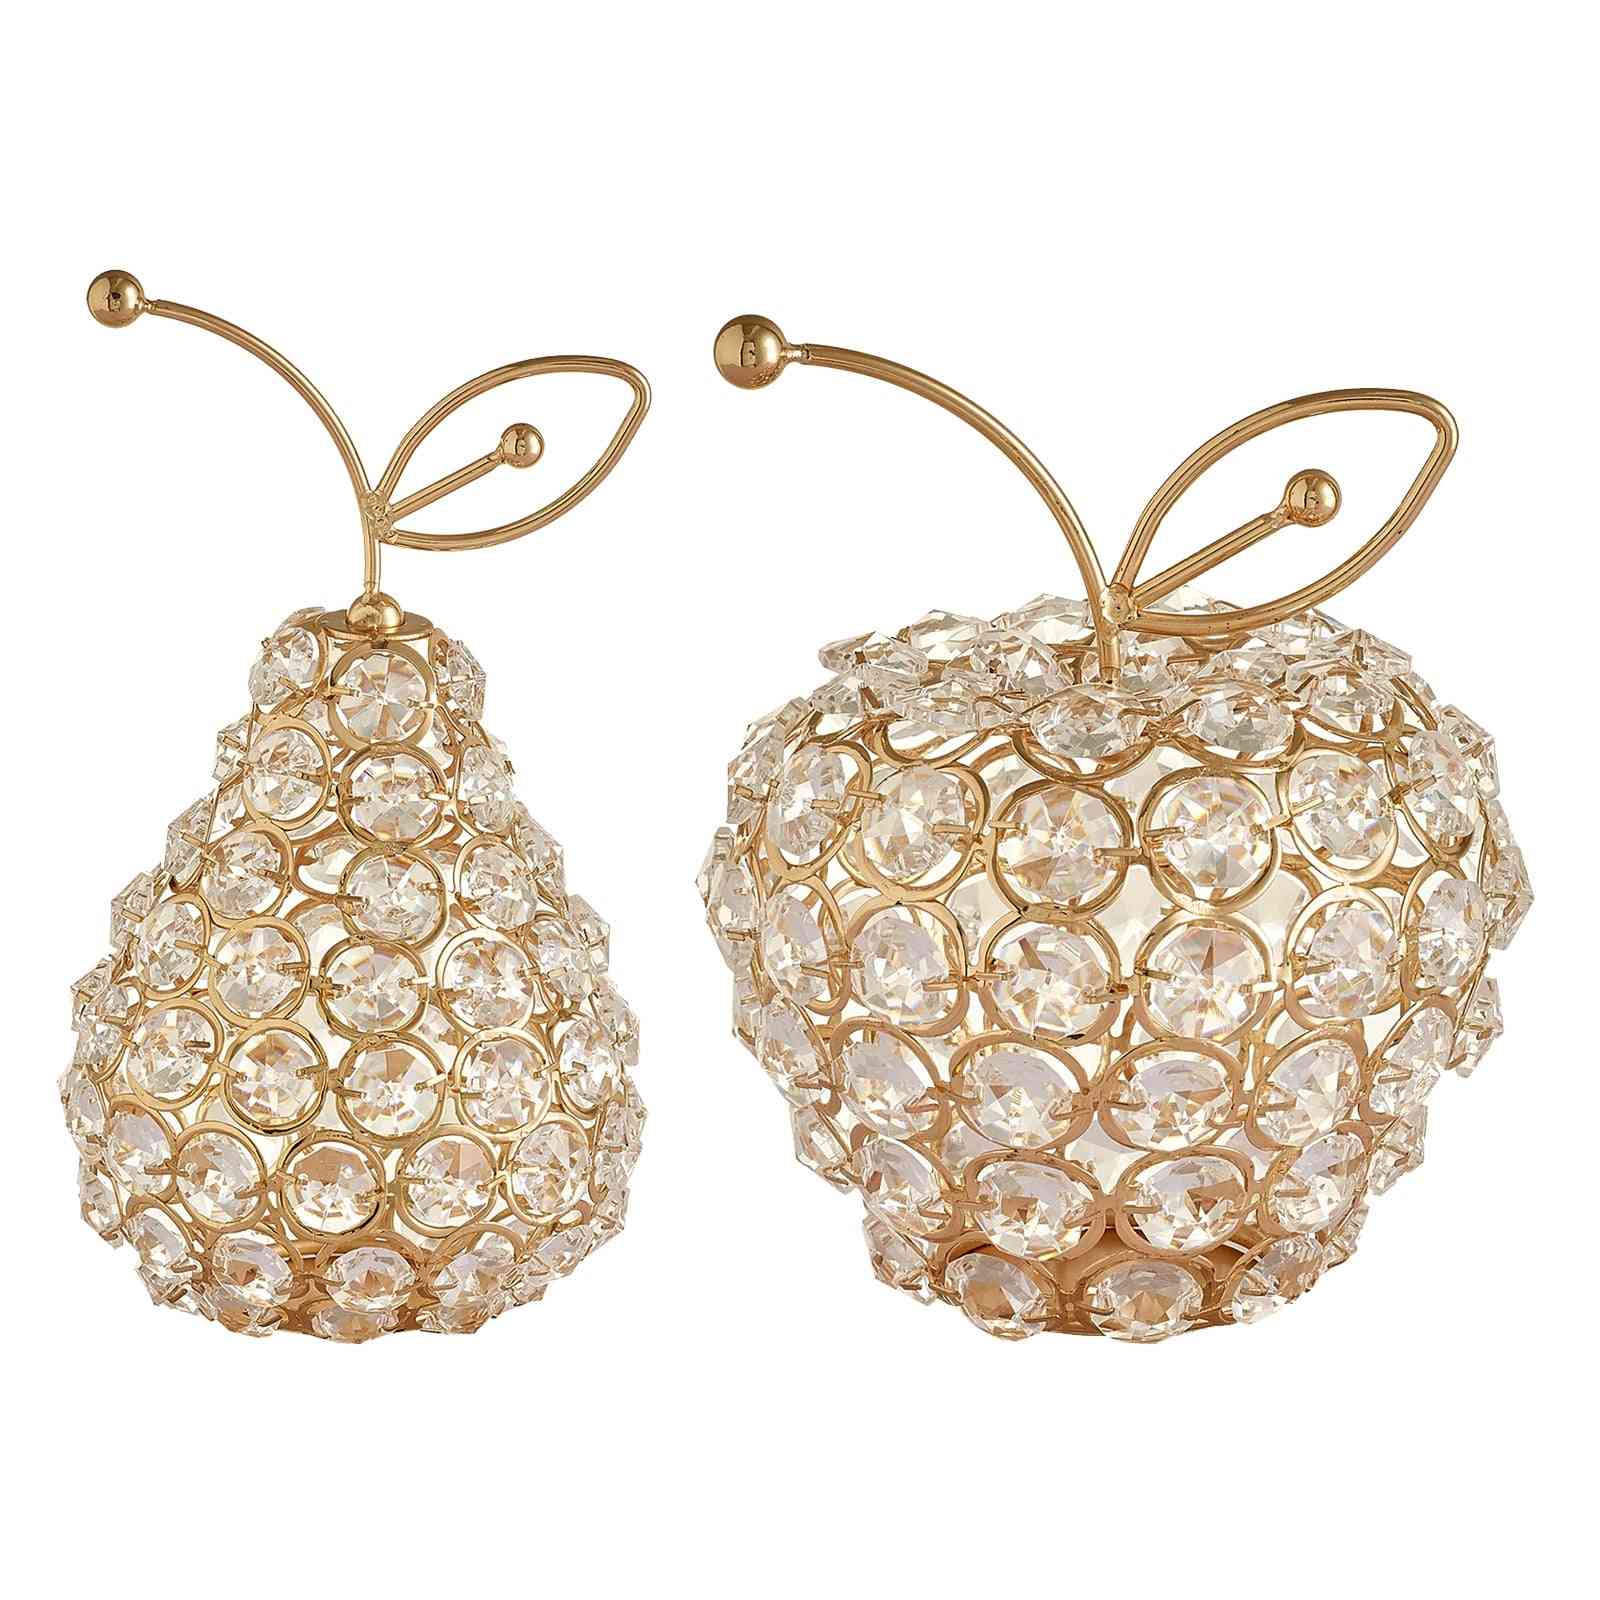 Cut Crystal Glass Fruit Apple Pear Collectible Figurines Ornaments